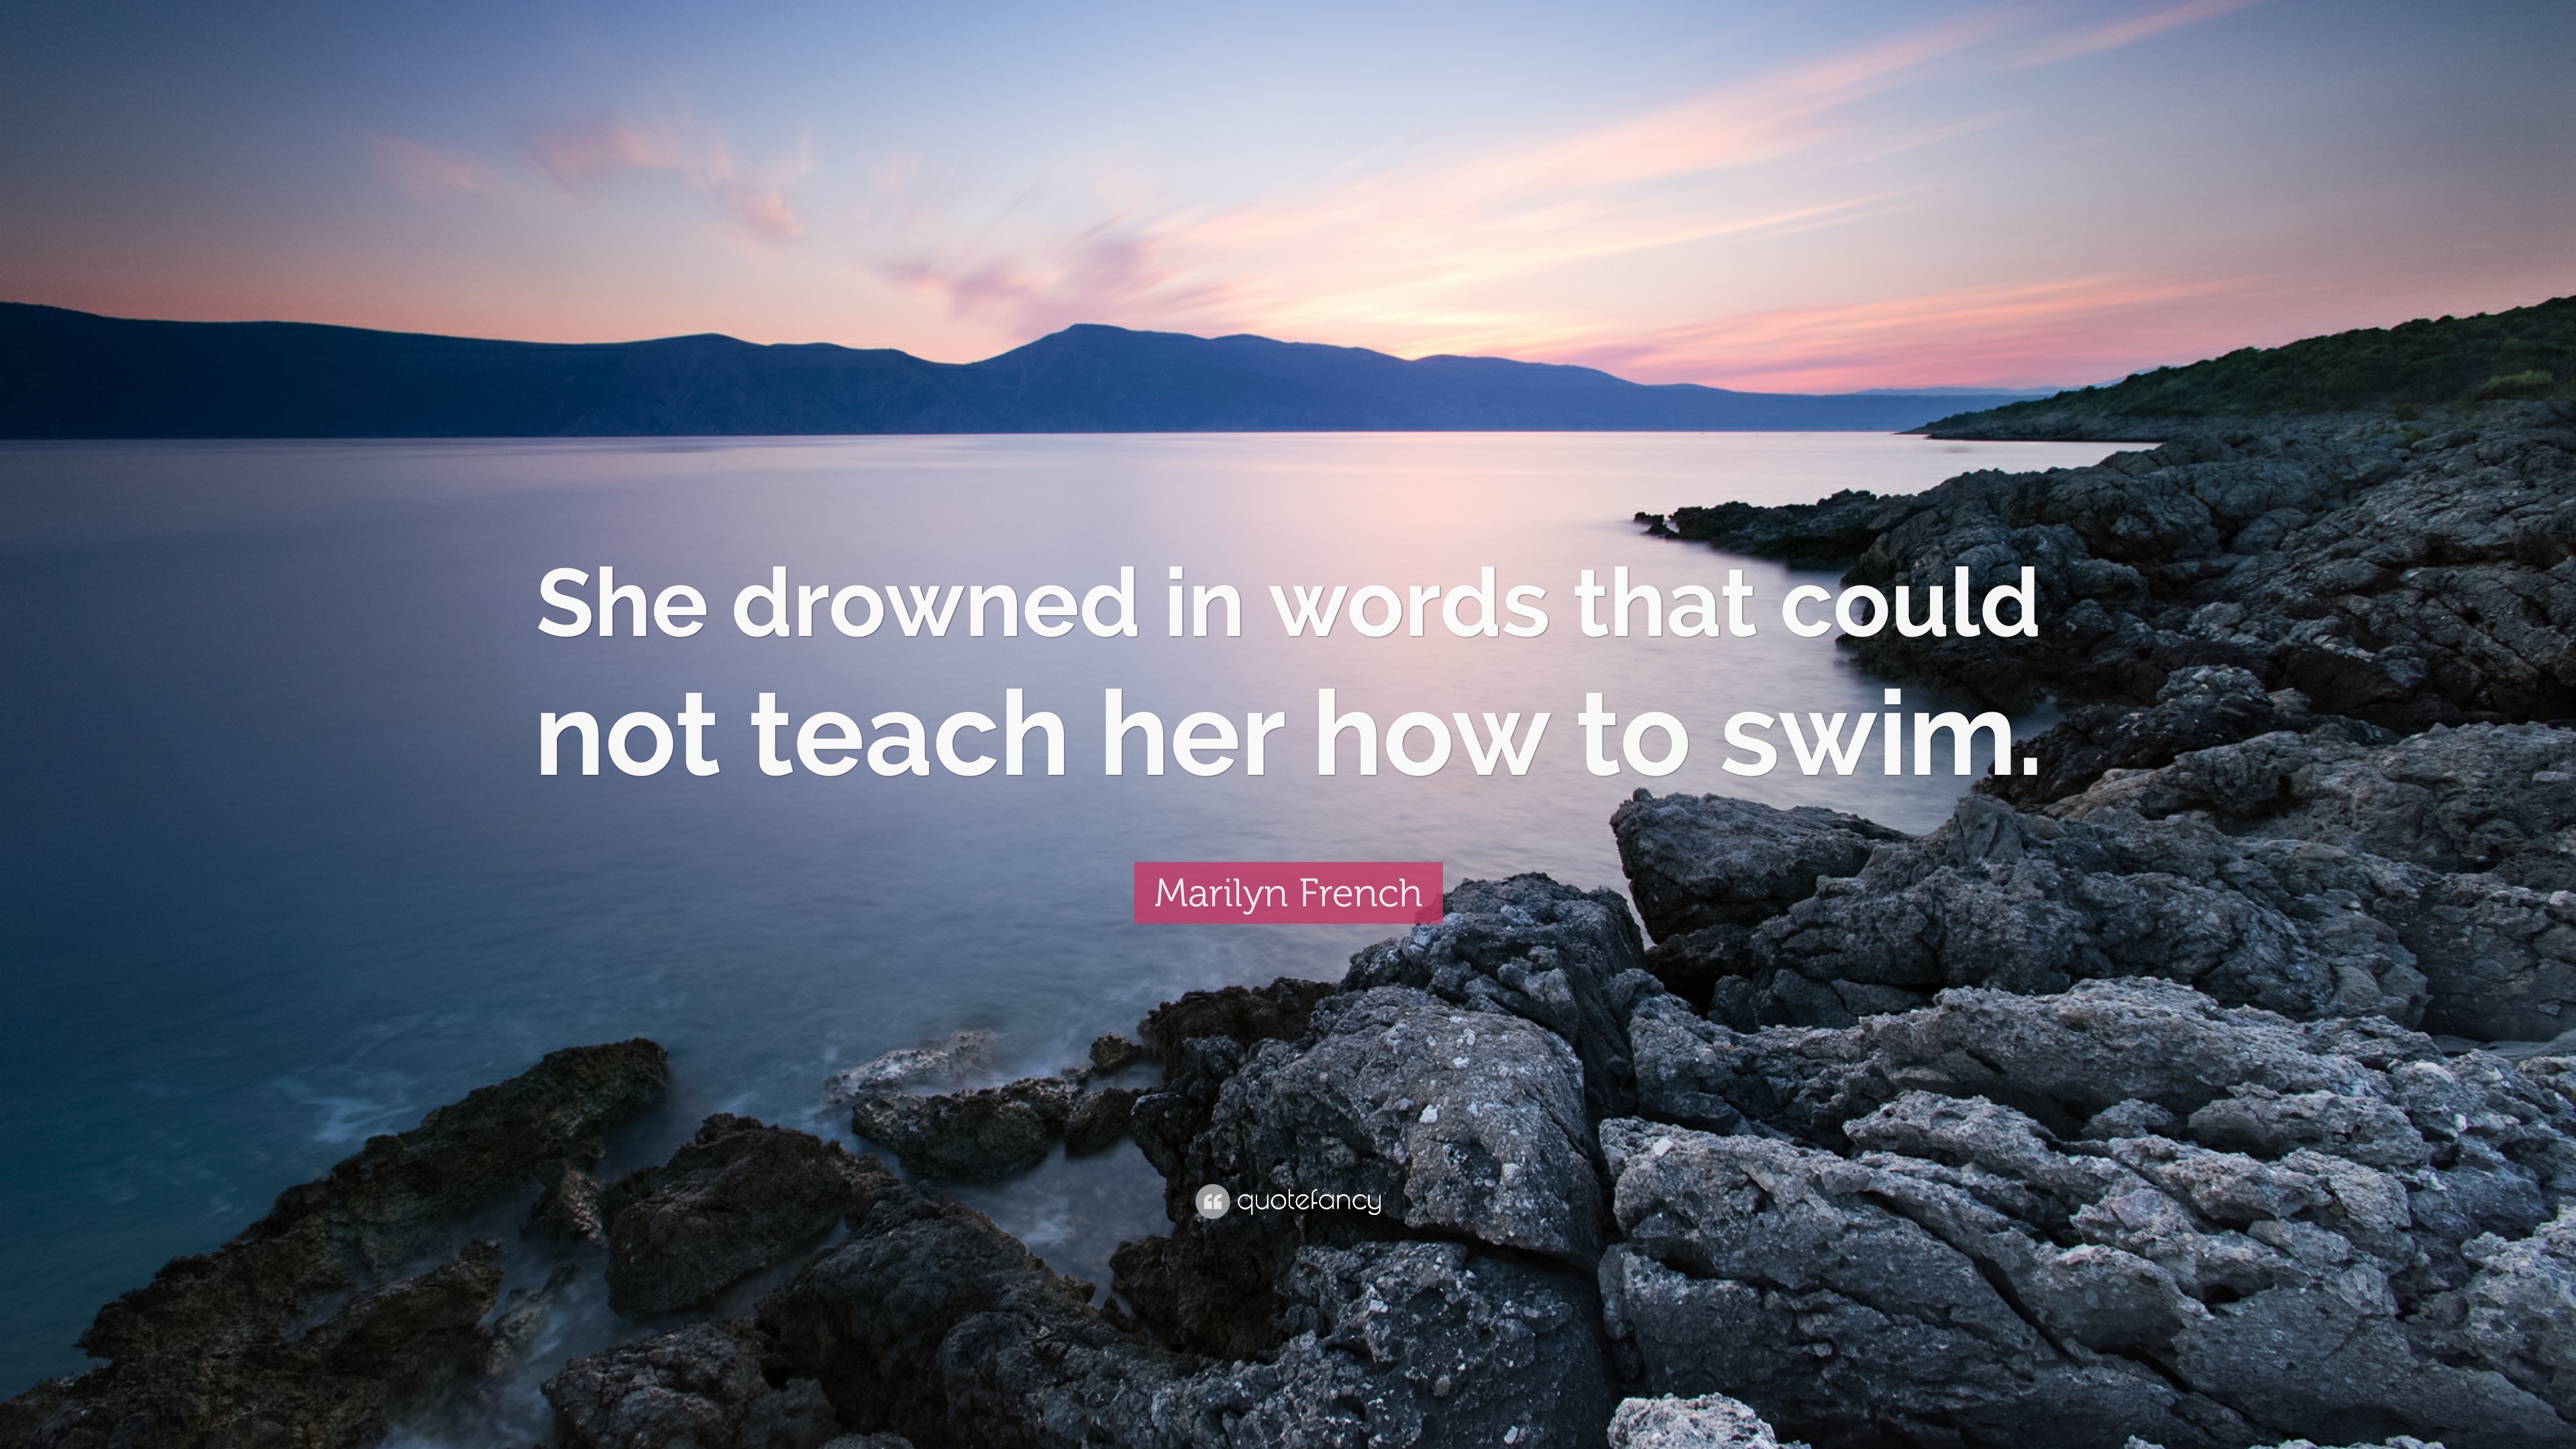 https://quotefancy.com/media/wallpaper/3840x2160/923429-Marilyn-French-Quote-She-drowned-in-words-that-could-not-teach-her.jpg